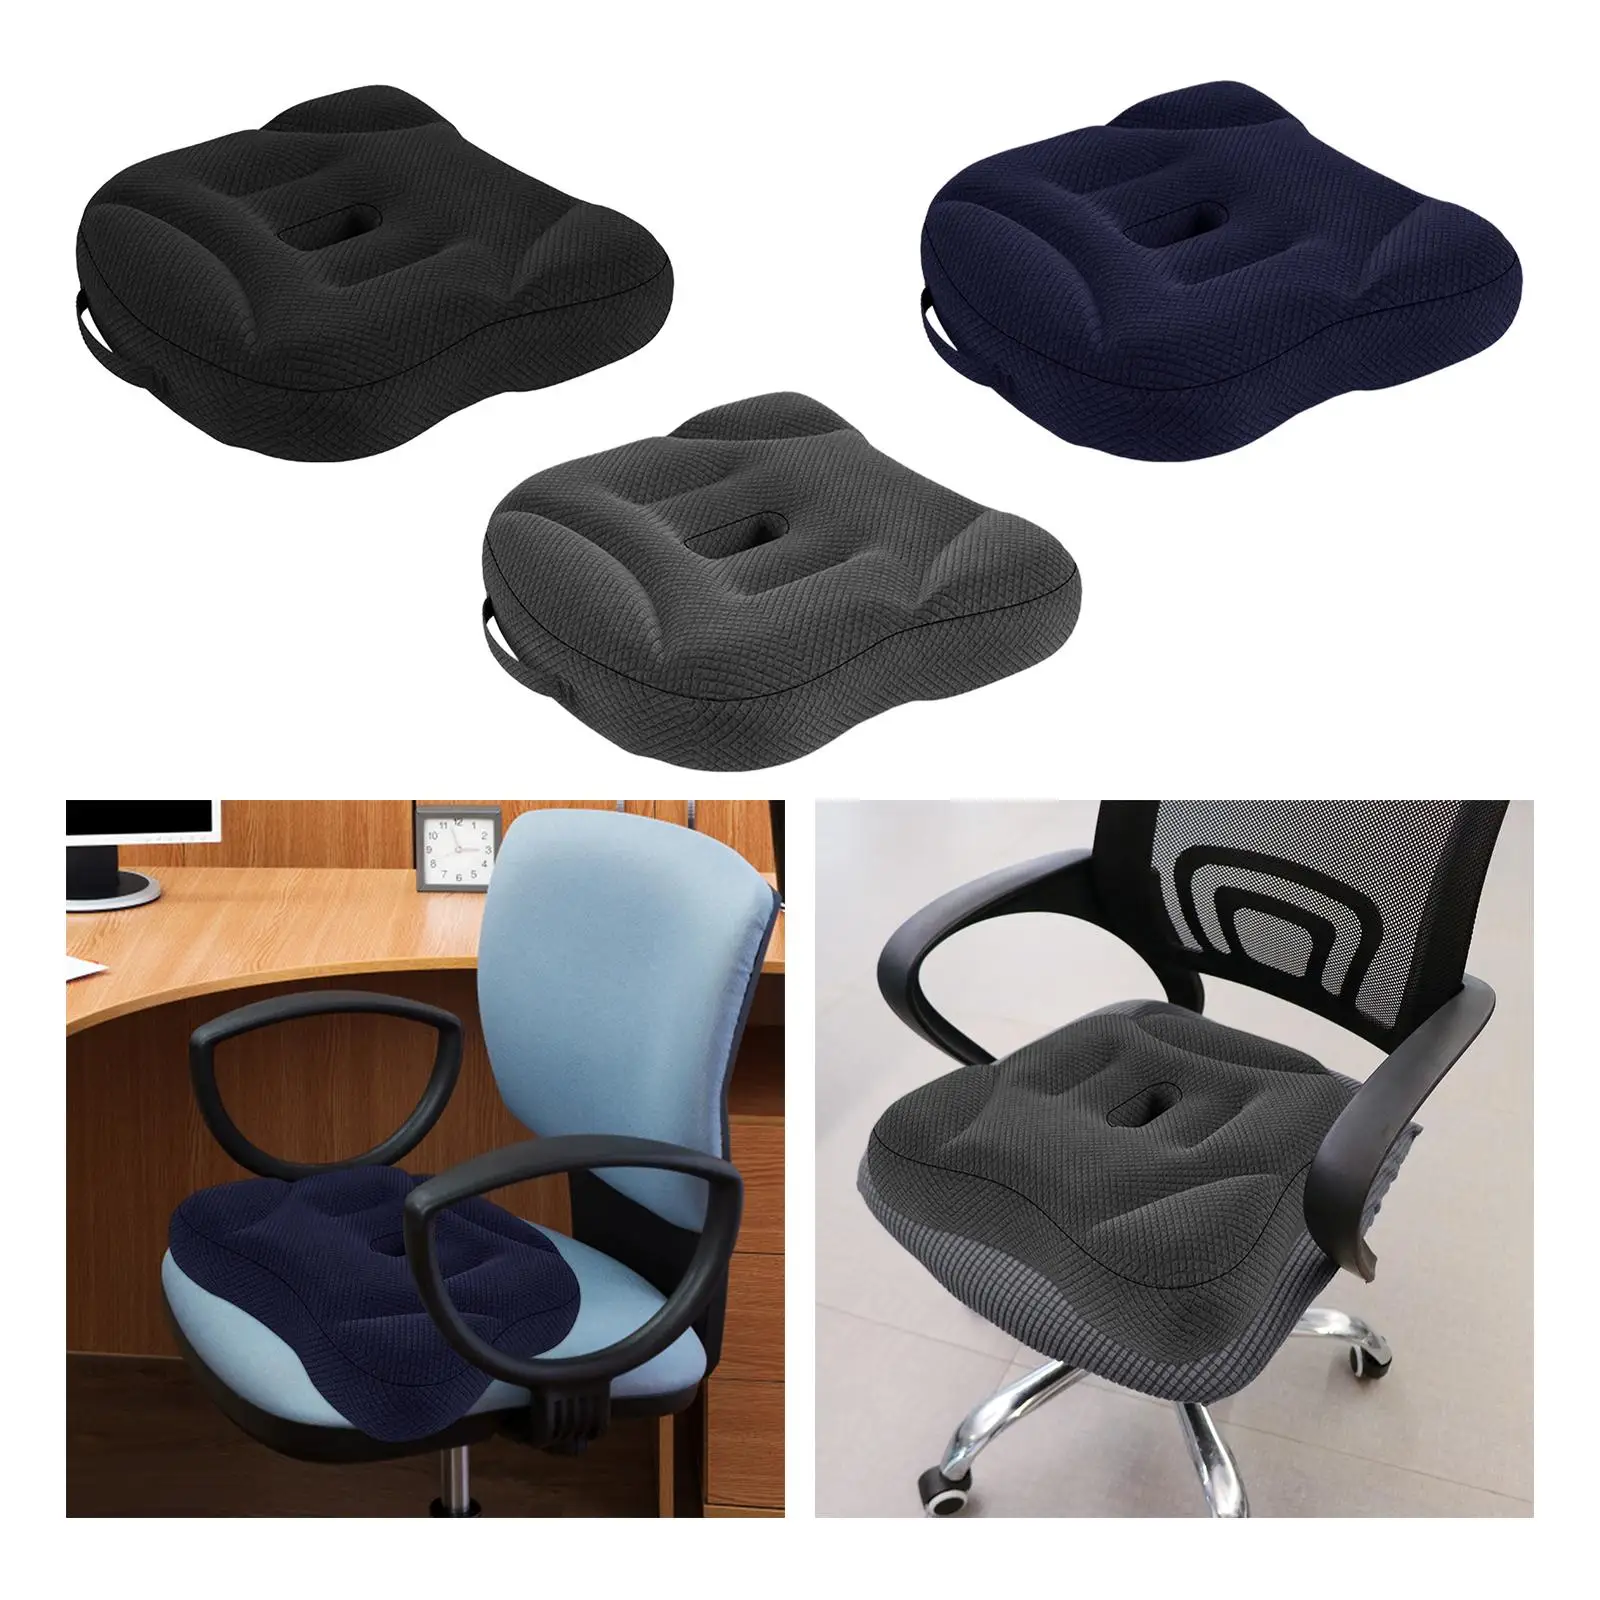 Seat Cushion Breathable Non Slip Comfortable for Office Desk Chair Cushion Chair Pad for Car Home Driving Traveling Office